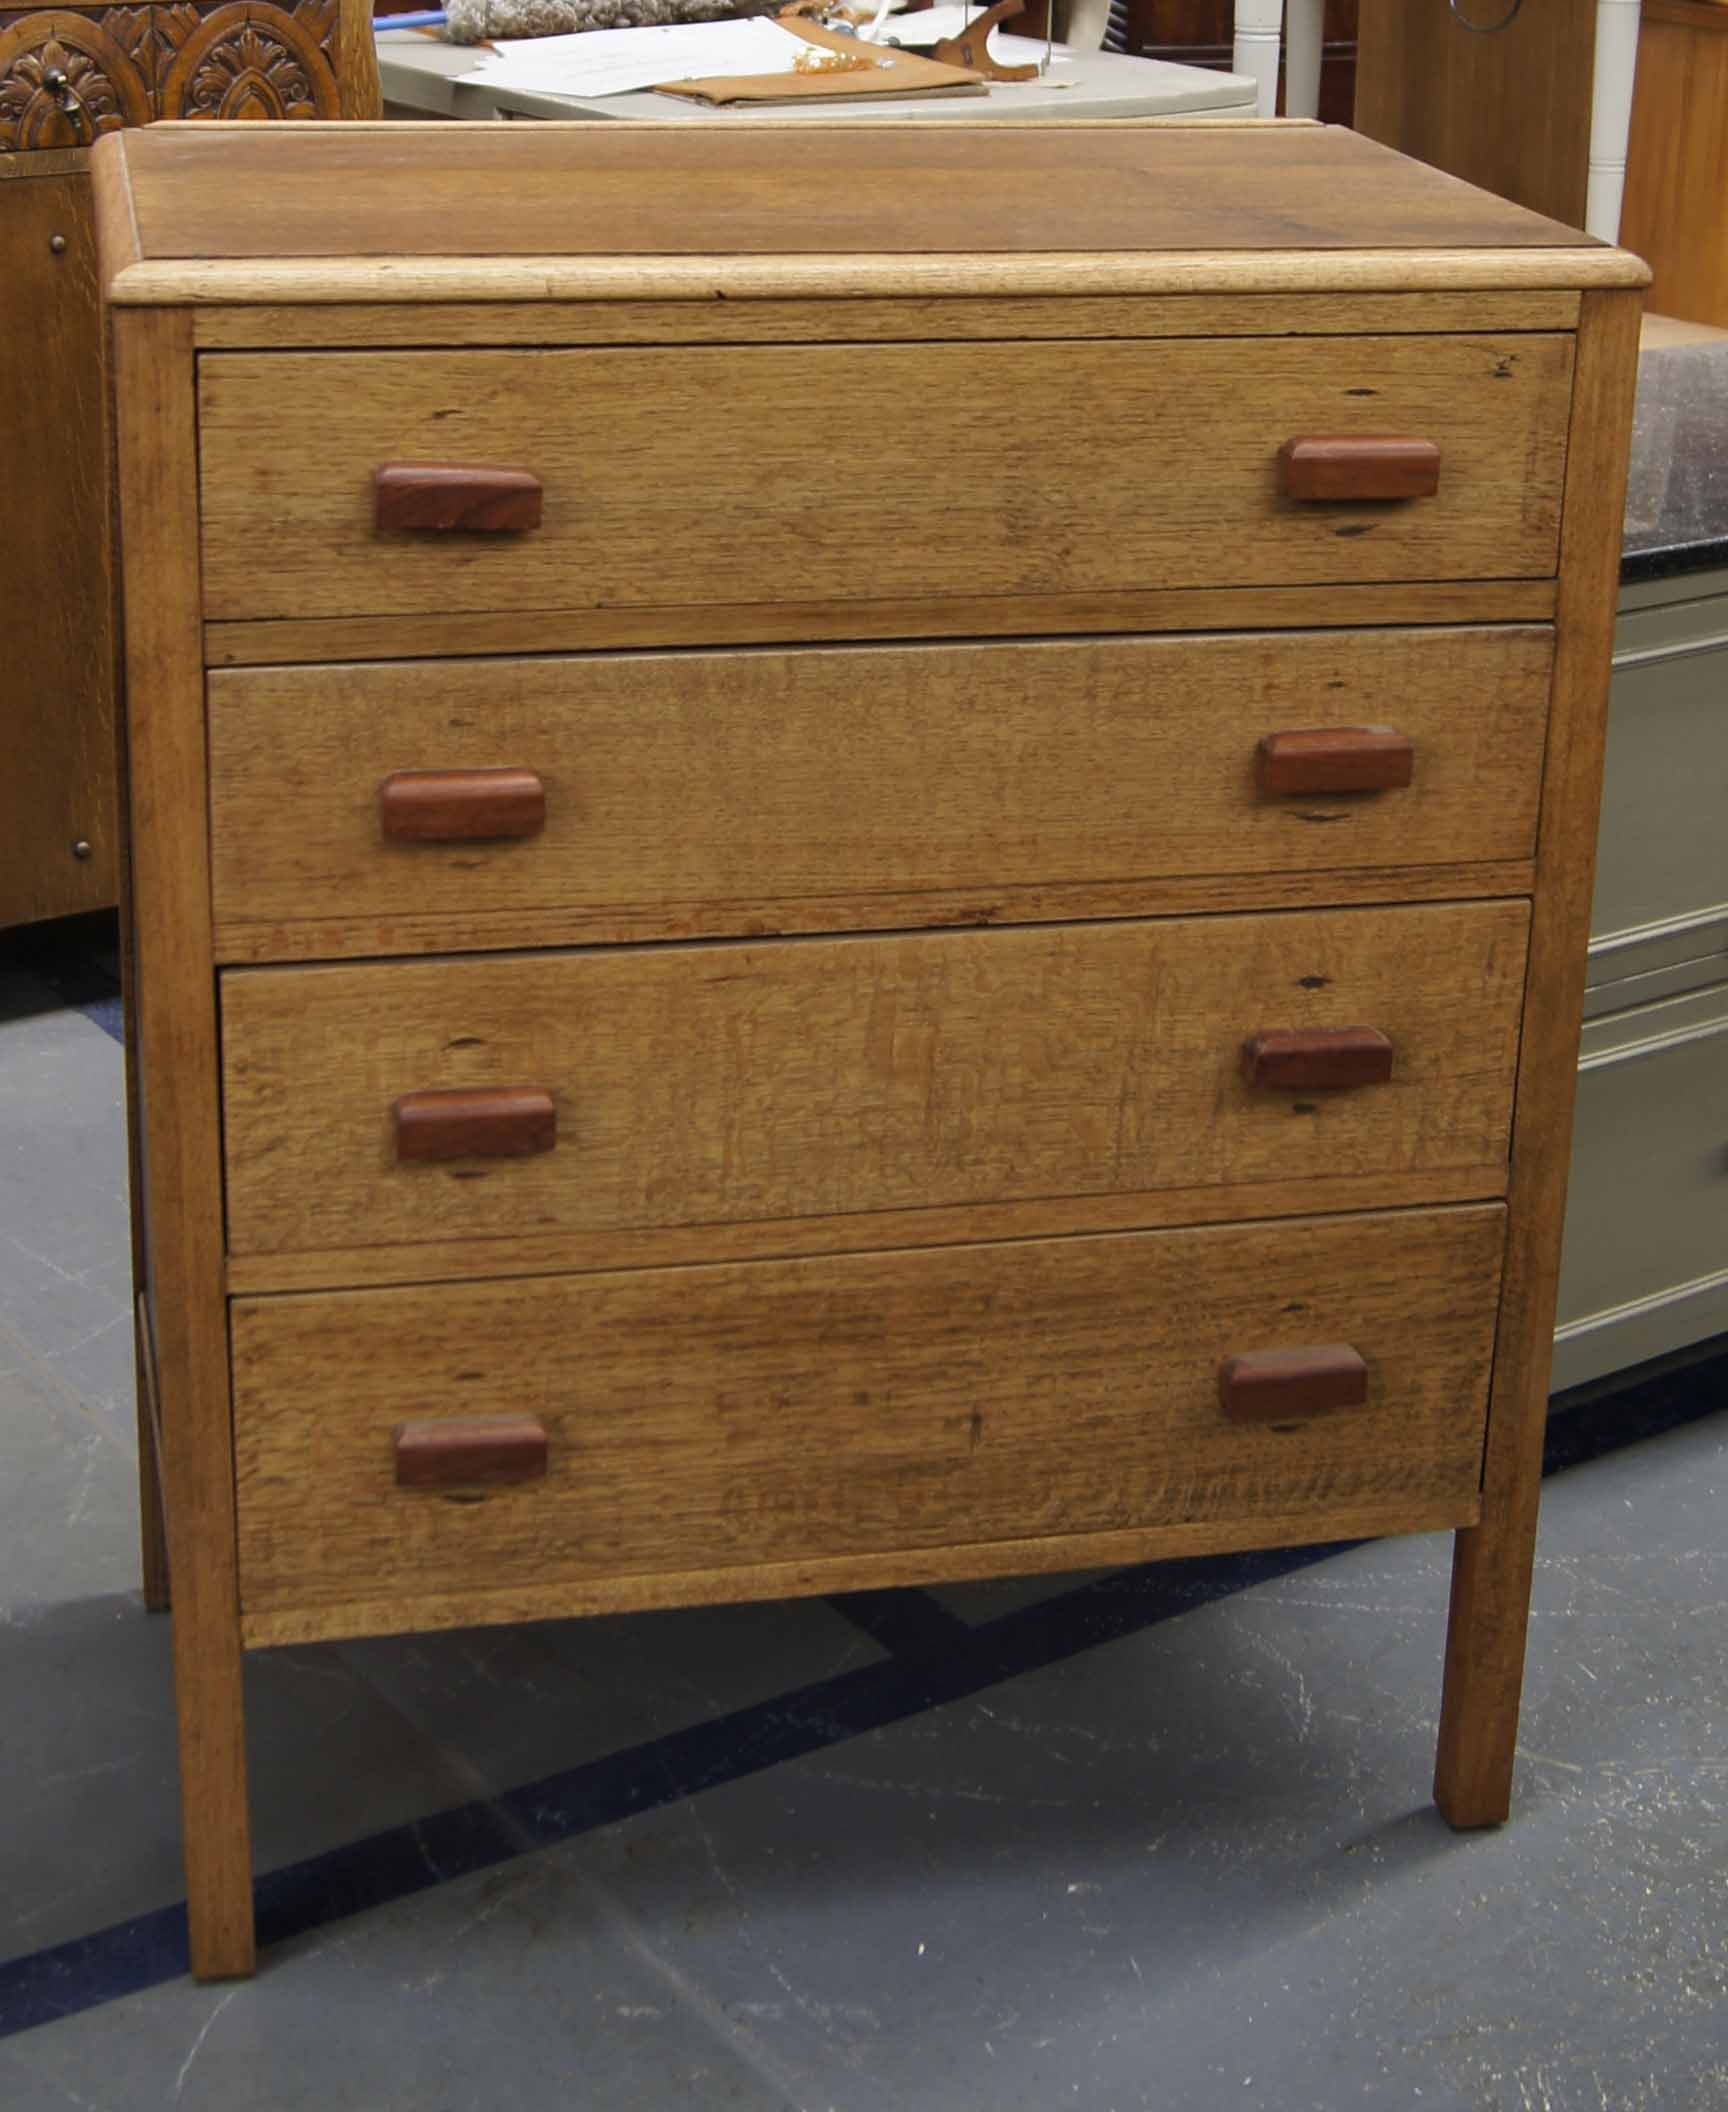 Original 1930's four drawer oak chest on straight legs with wood handles upcycled by J D Designs